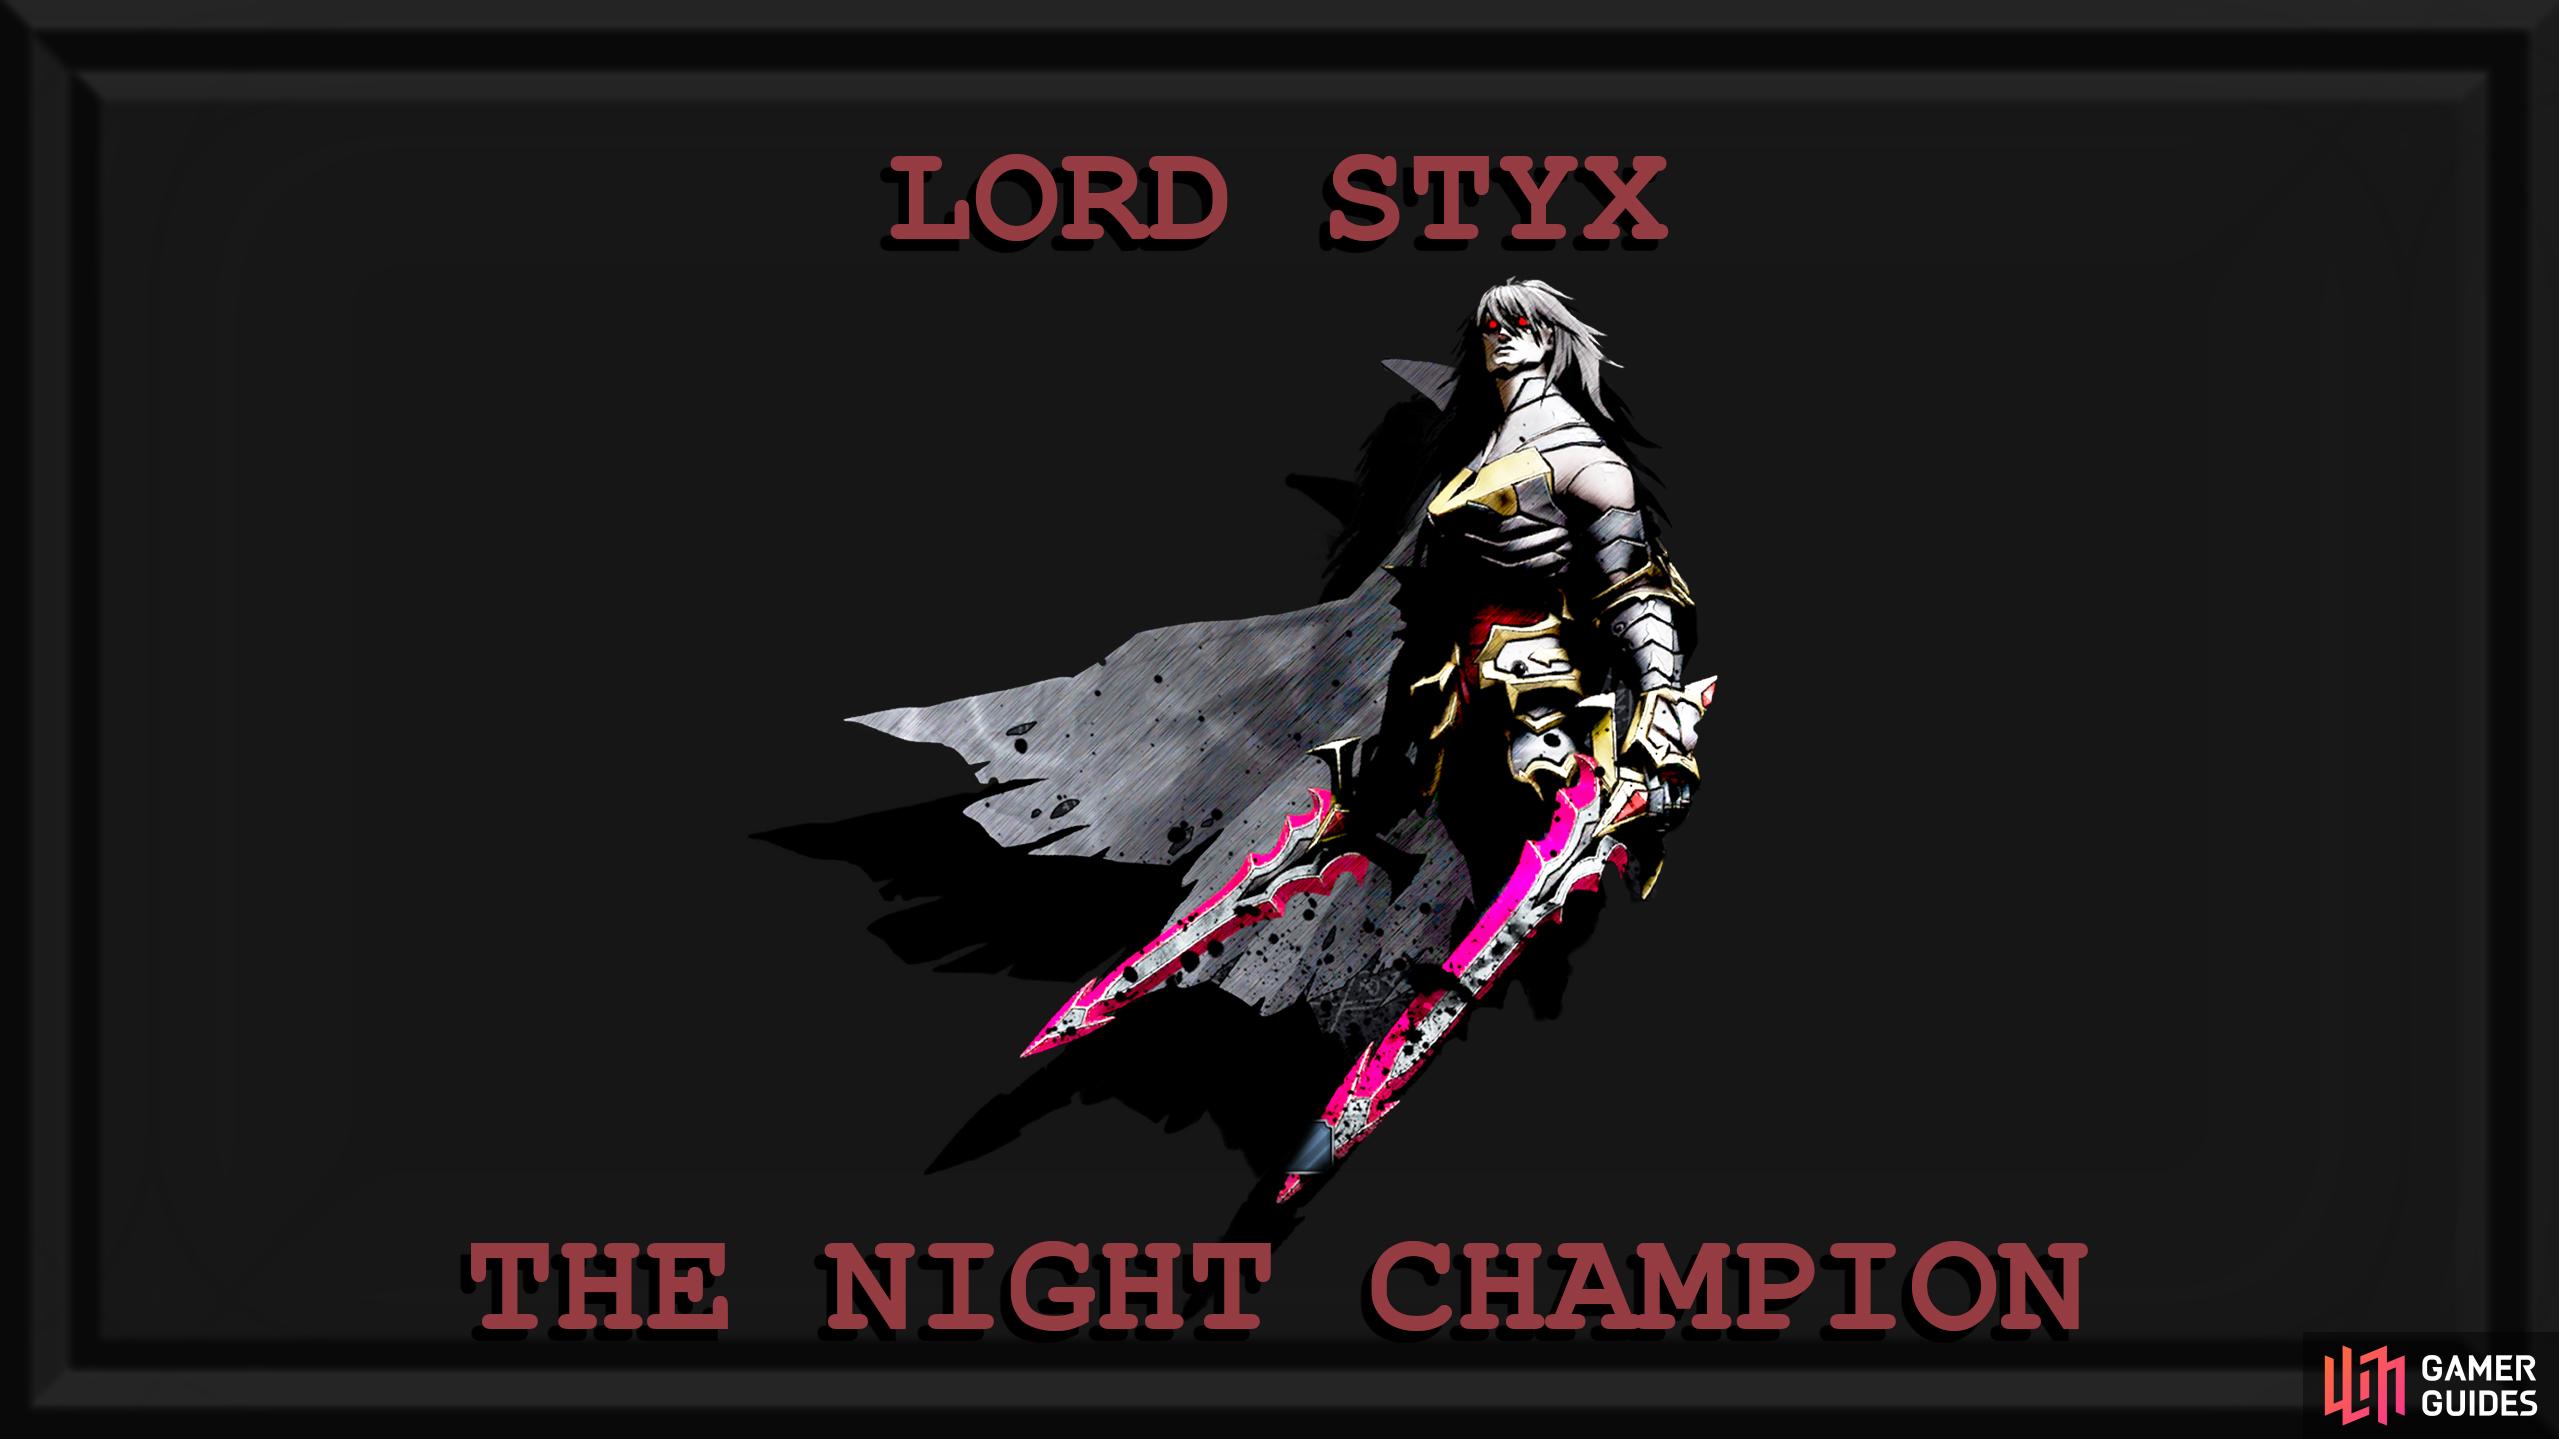 Lord Styx is a level 83 boss in V Rising who unlocks the Blood Key needed to access Dracula’s Castle.